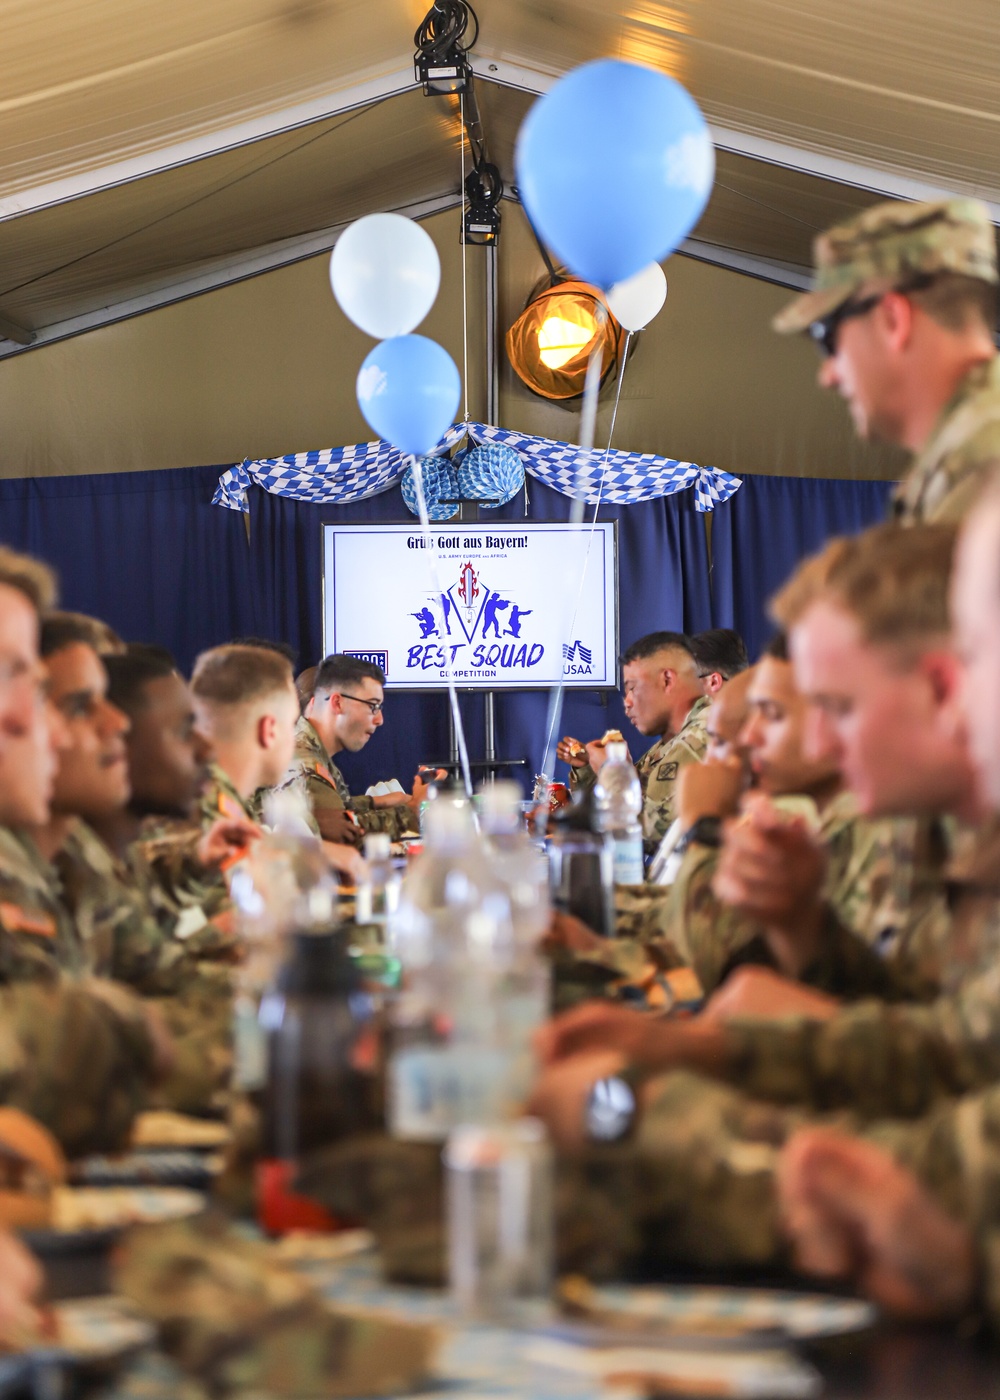 U.S. Army Best Squad 2022 Competitors Gather for Lunch Before Competition